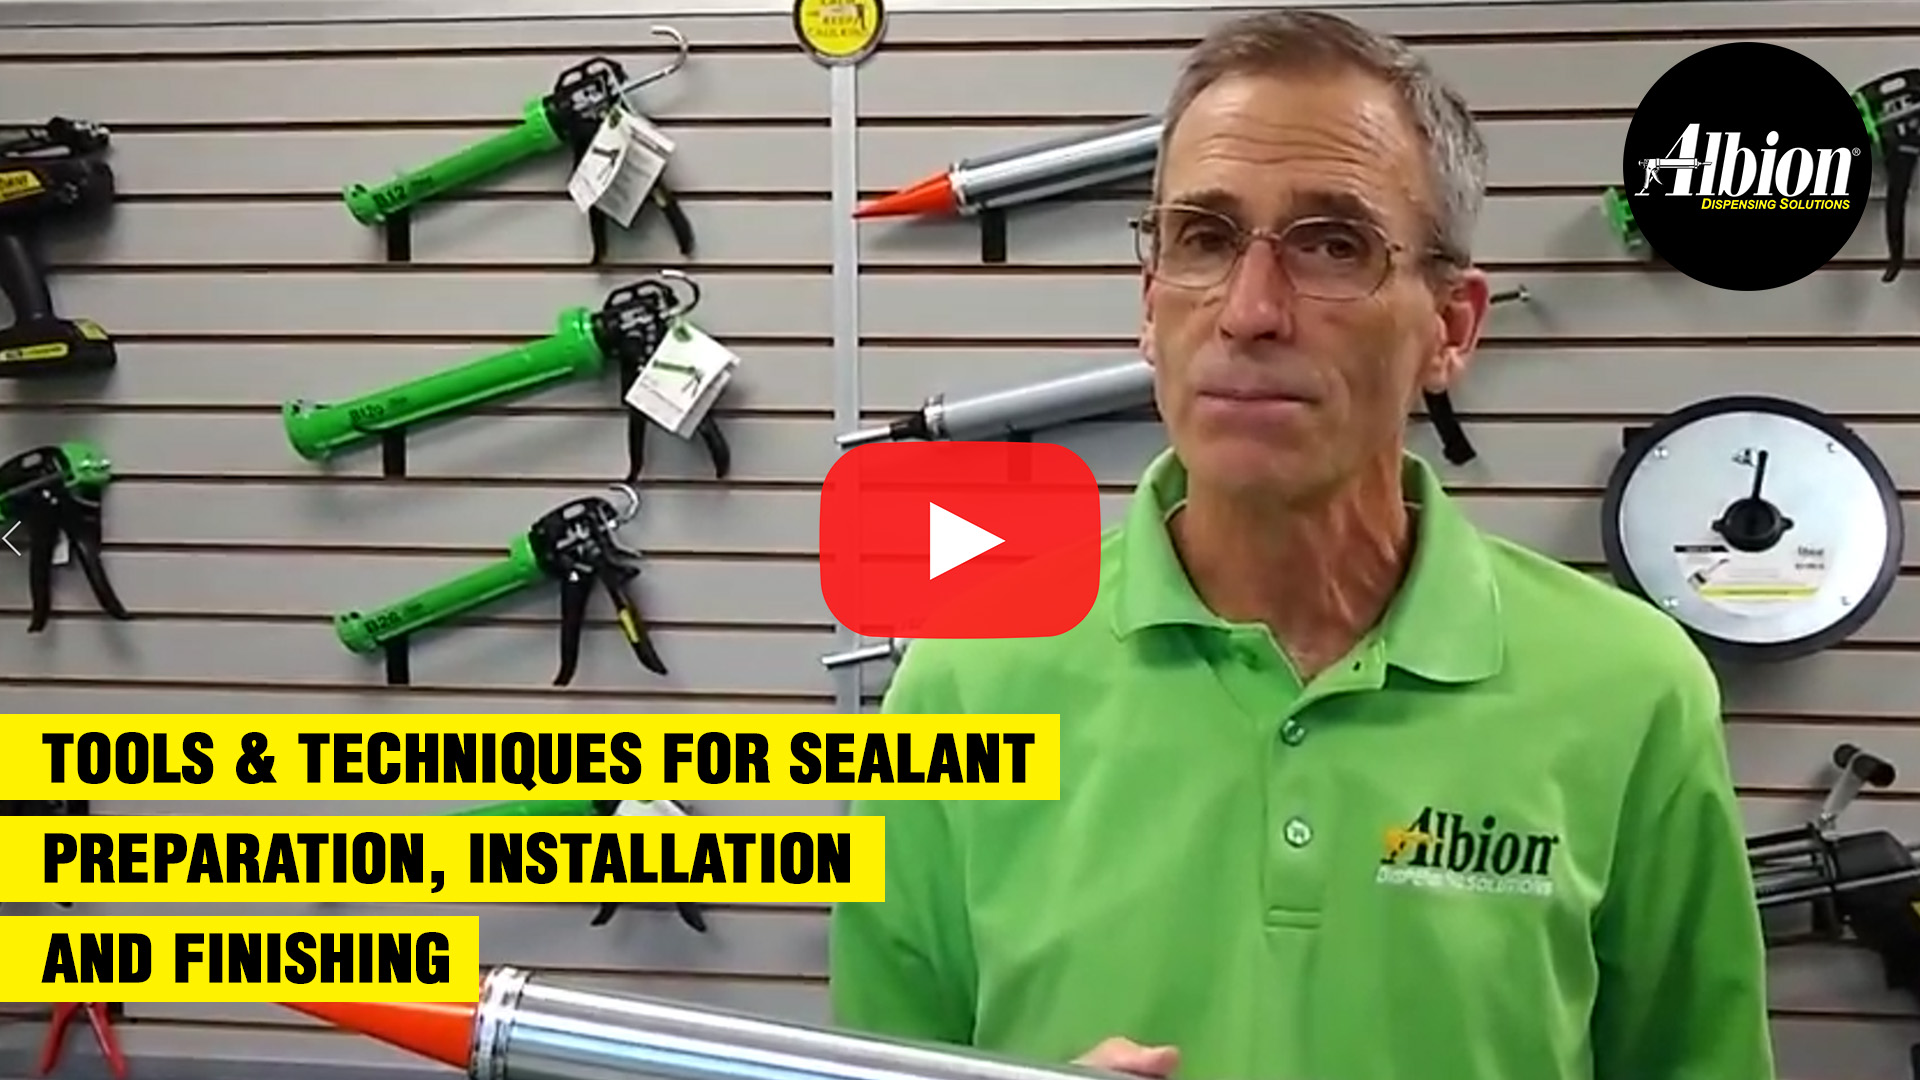 Tools & Techniques for Efficient Sealant Joint Preparation, Installation and Finishing (by Bob Reynolds)